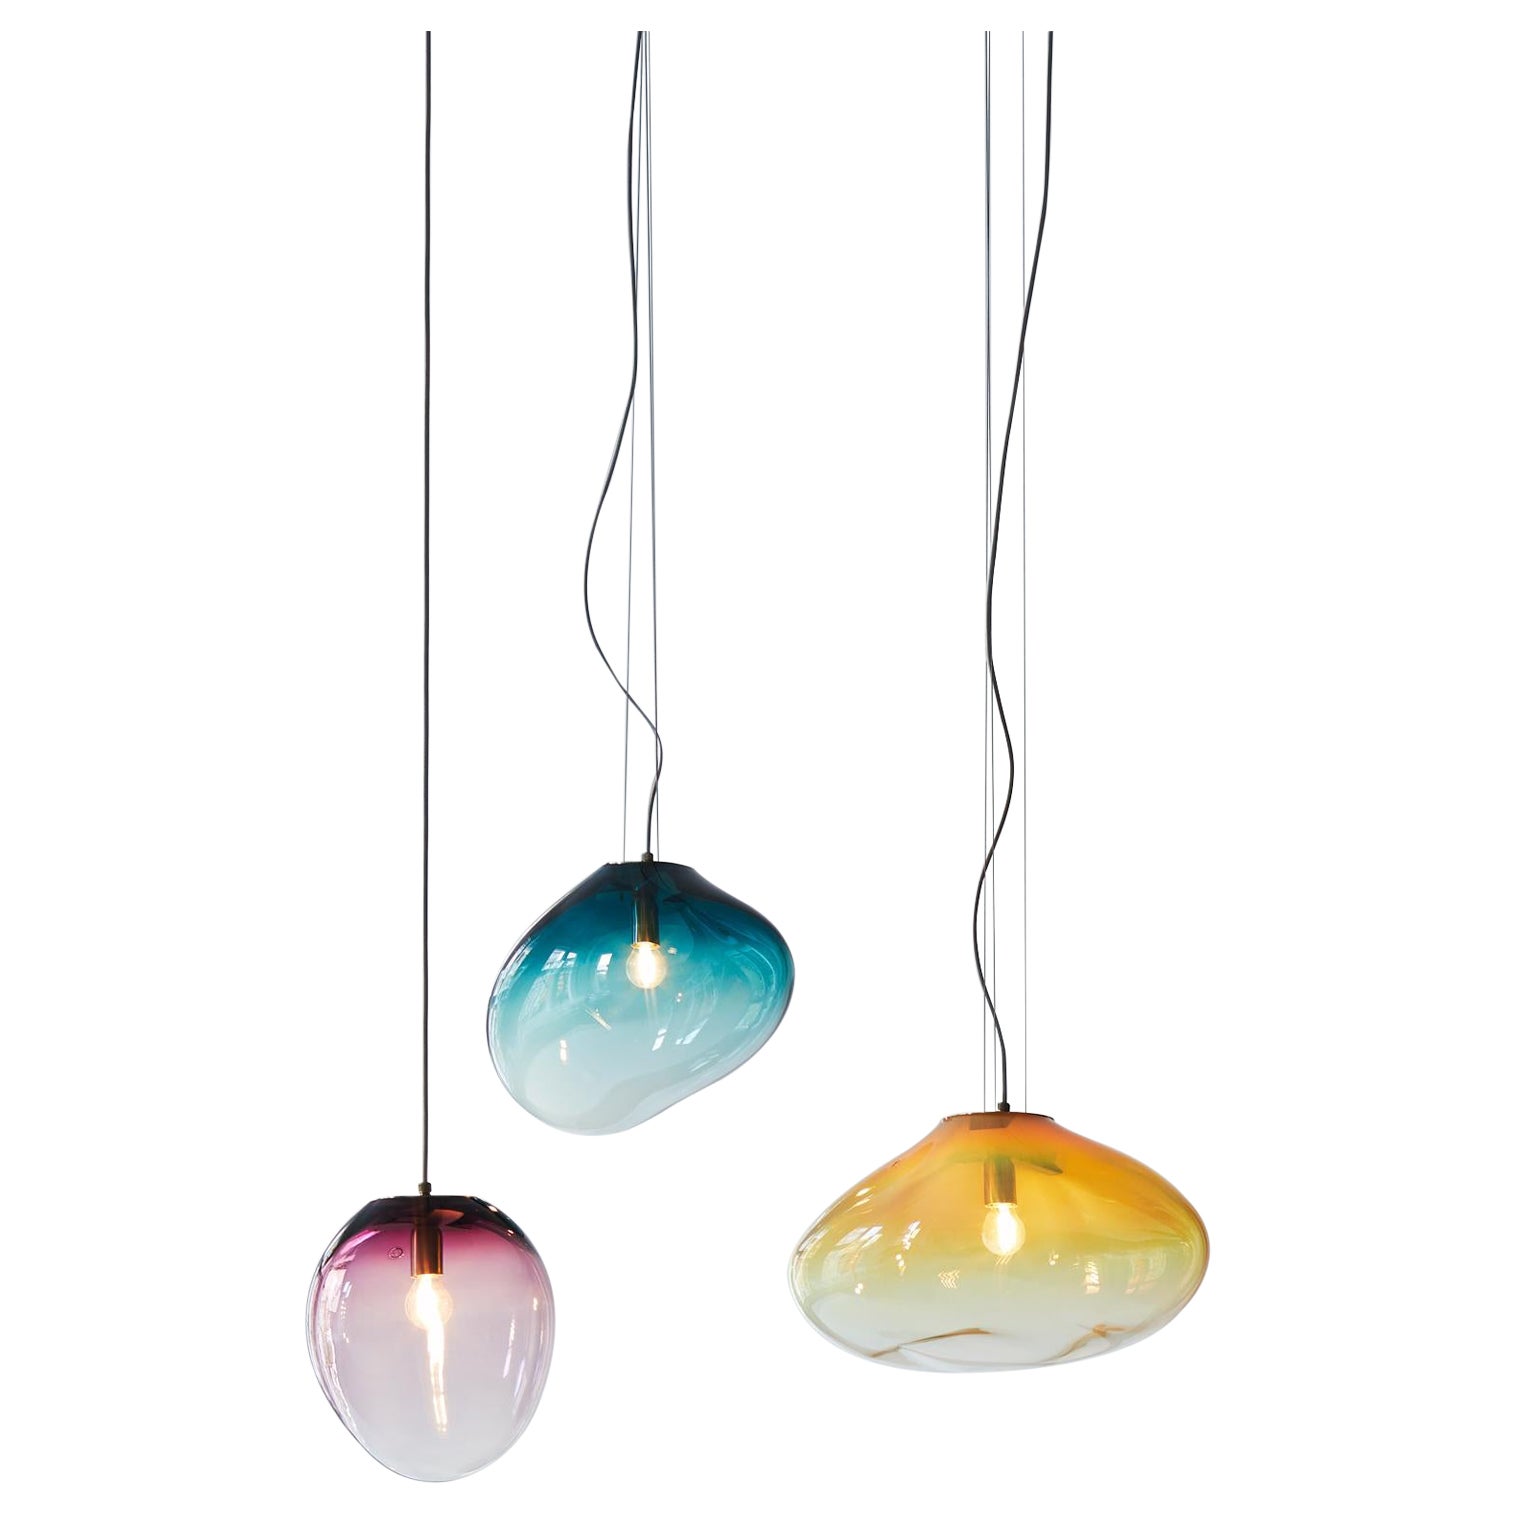 Sedna Ceiling Lamp, Hand-Blown Murano Glass, 2021, Size "XL"